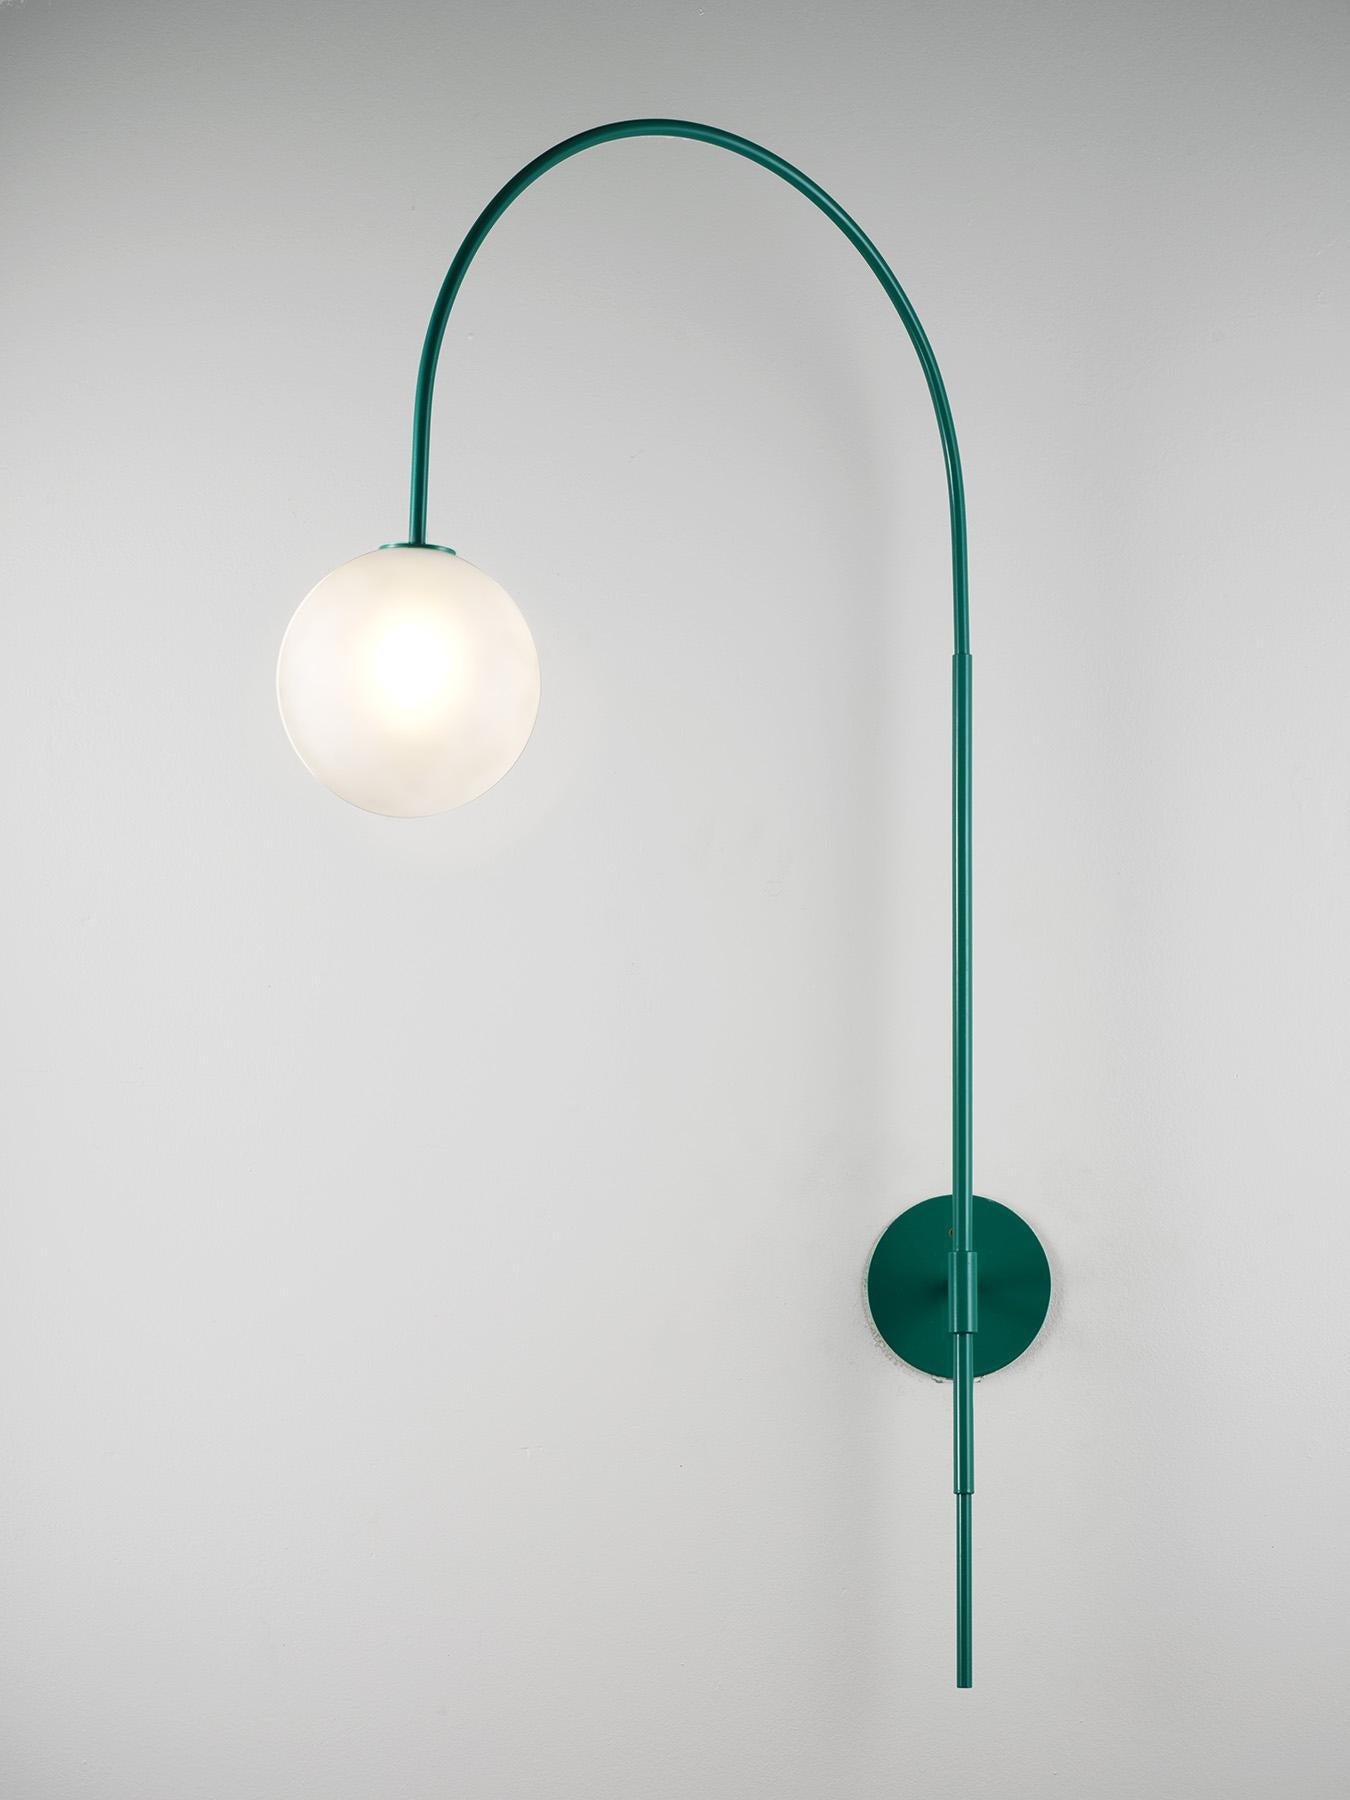 The ARC wall lamp or by Blueprint Lighting is a dramatically overscaled study in clean lines and simple form inspired by the tenets of the Bauhaus, ARC is truly a go-anywhere design and is equally at home in residential, commercial and hospitality